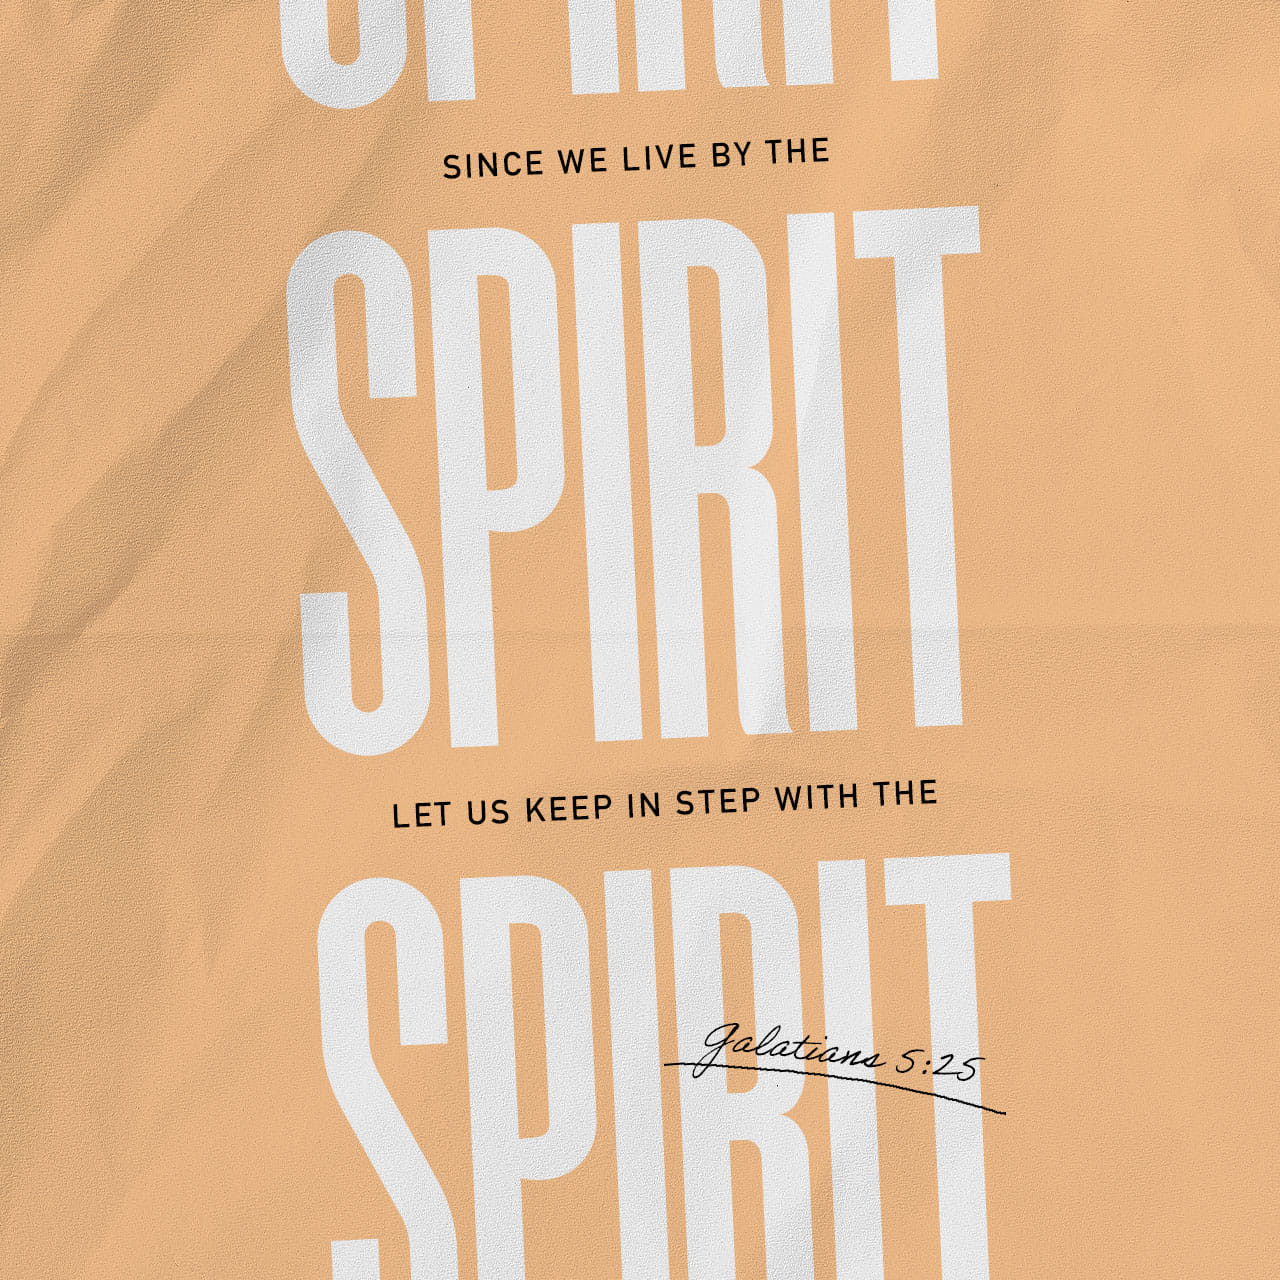 Galatians 5:25 If we live in the Spirit, let us also walk in the Spirit. | King James Version (KJV) | Download The Bible App Now